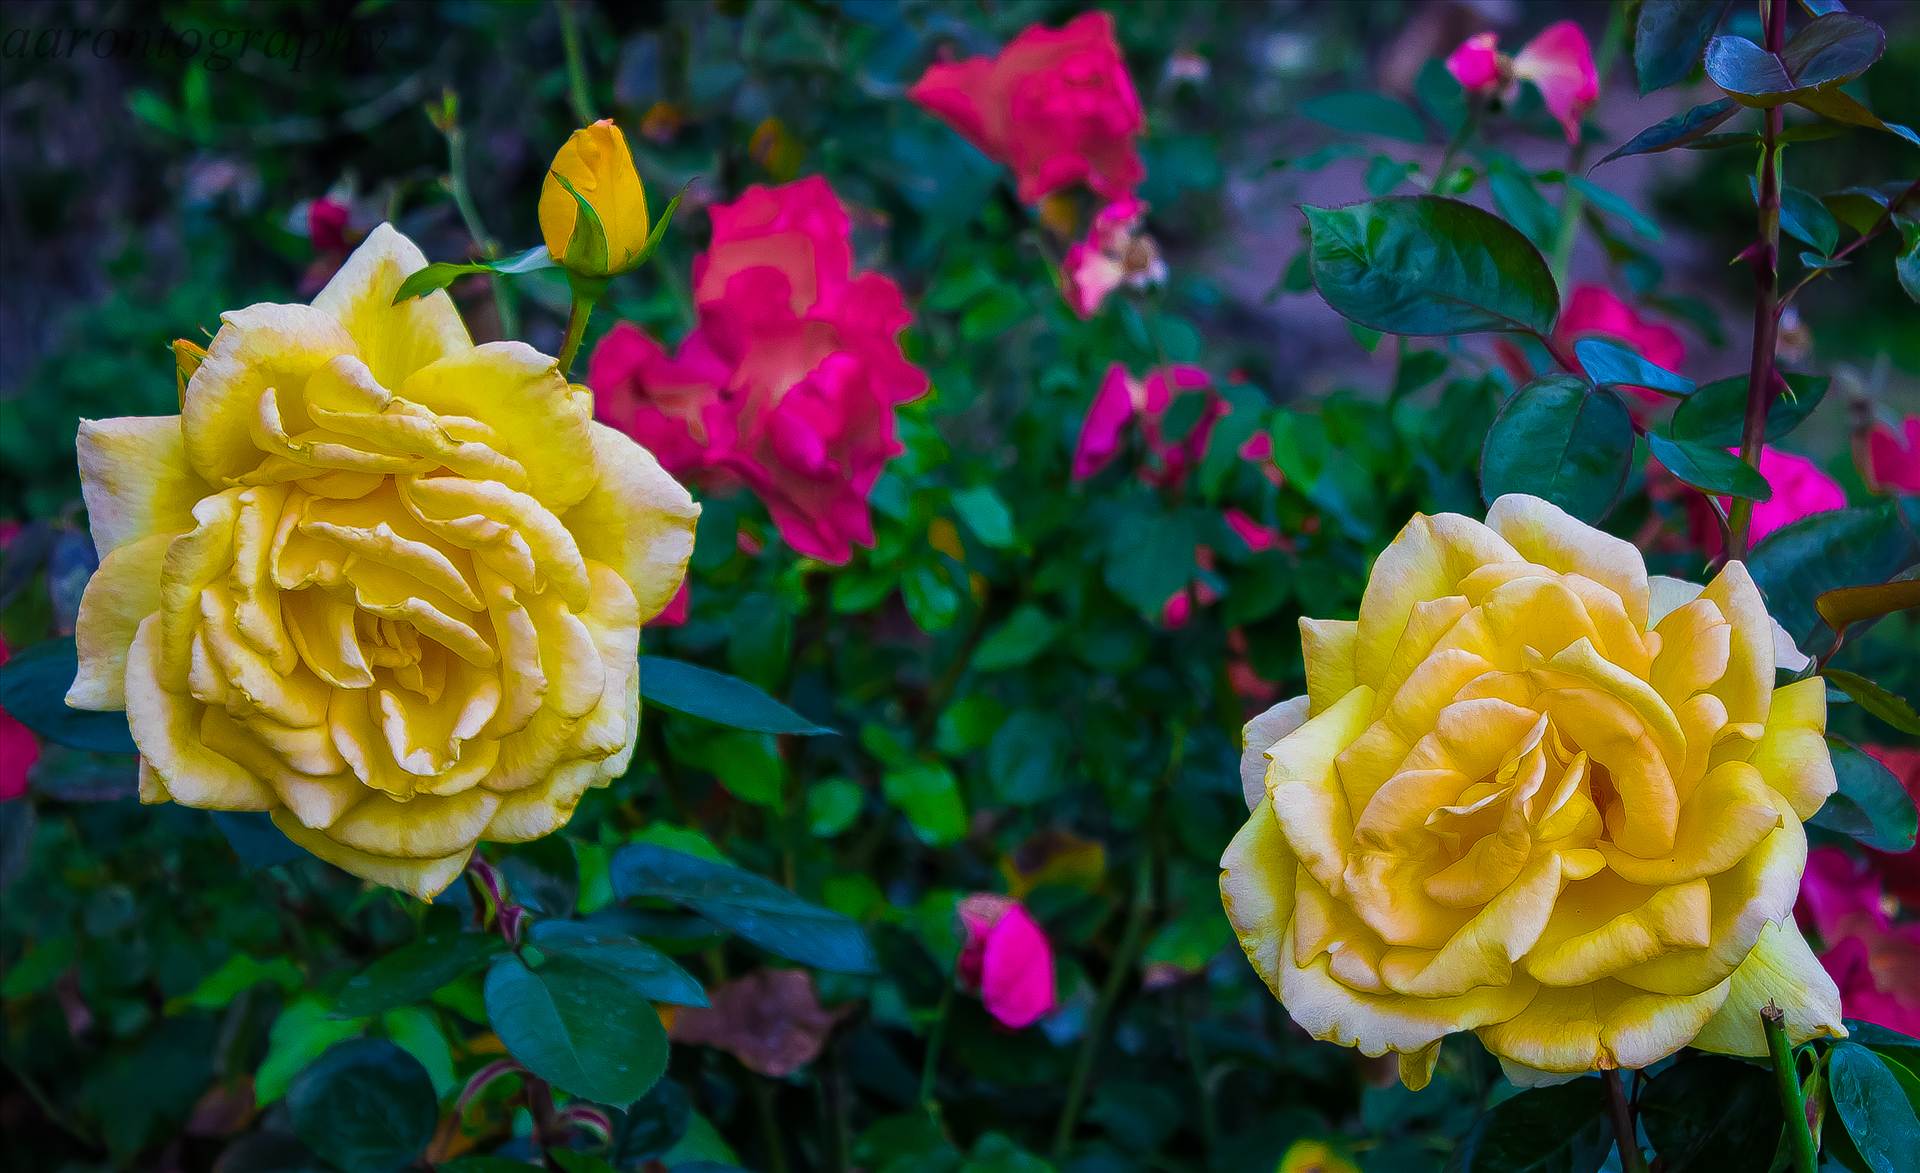 PINK SURROUNDED BY YELLOW.JPG - undefined by Aaron